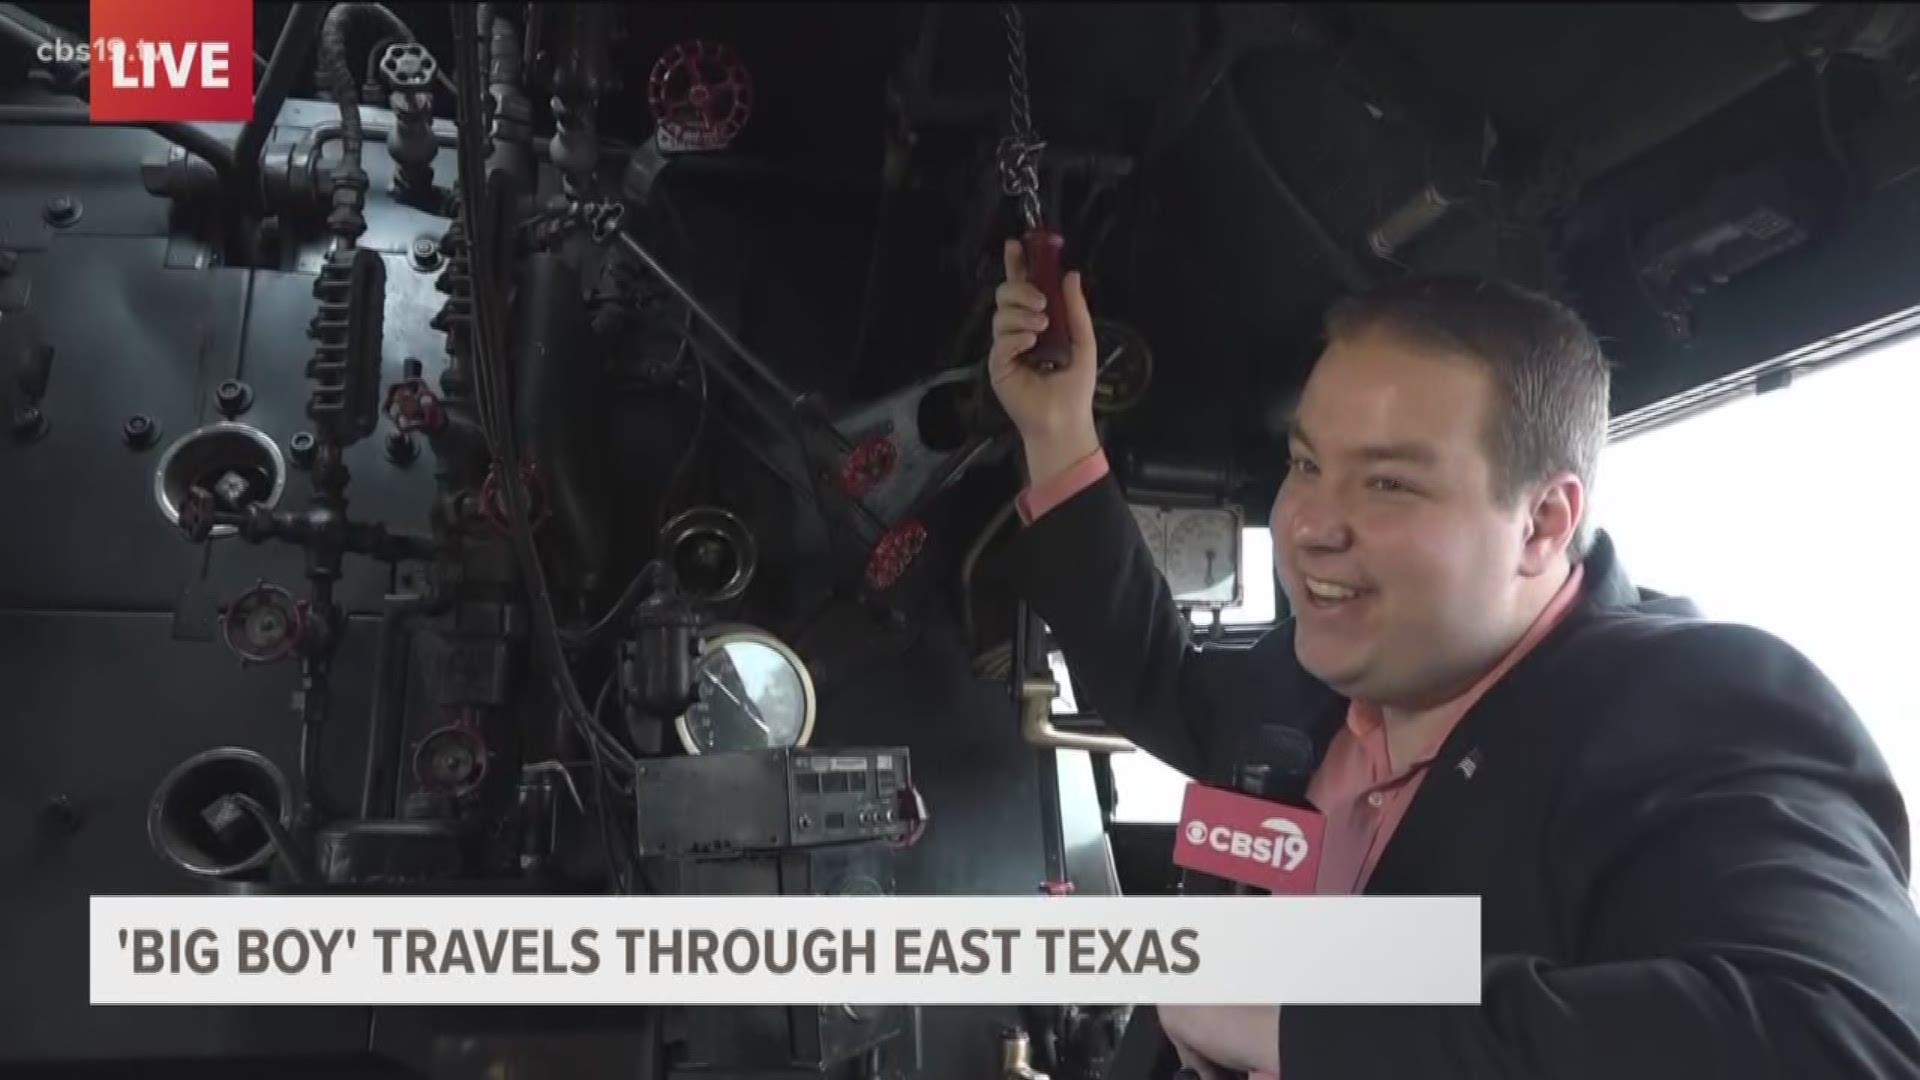 Have you ever seen a big train and just wanted to blow the whistle? Well Meteorologist Michael Behrens has, and now he has actually lived that dream!